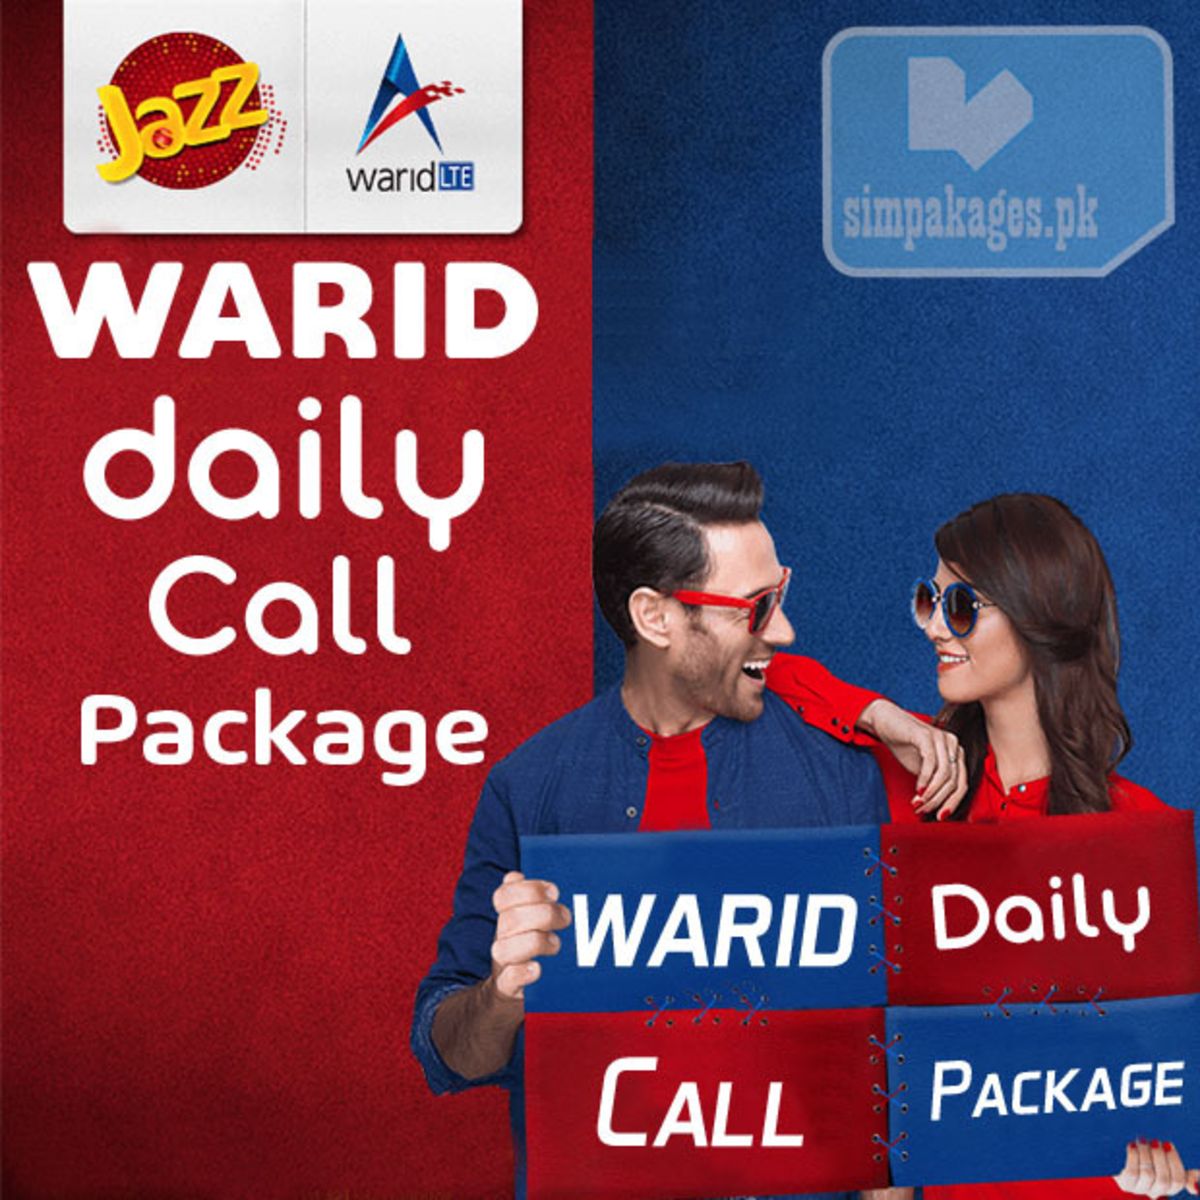 Warid daily call packages